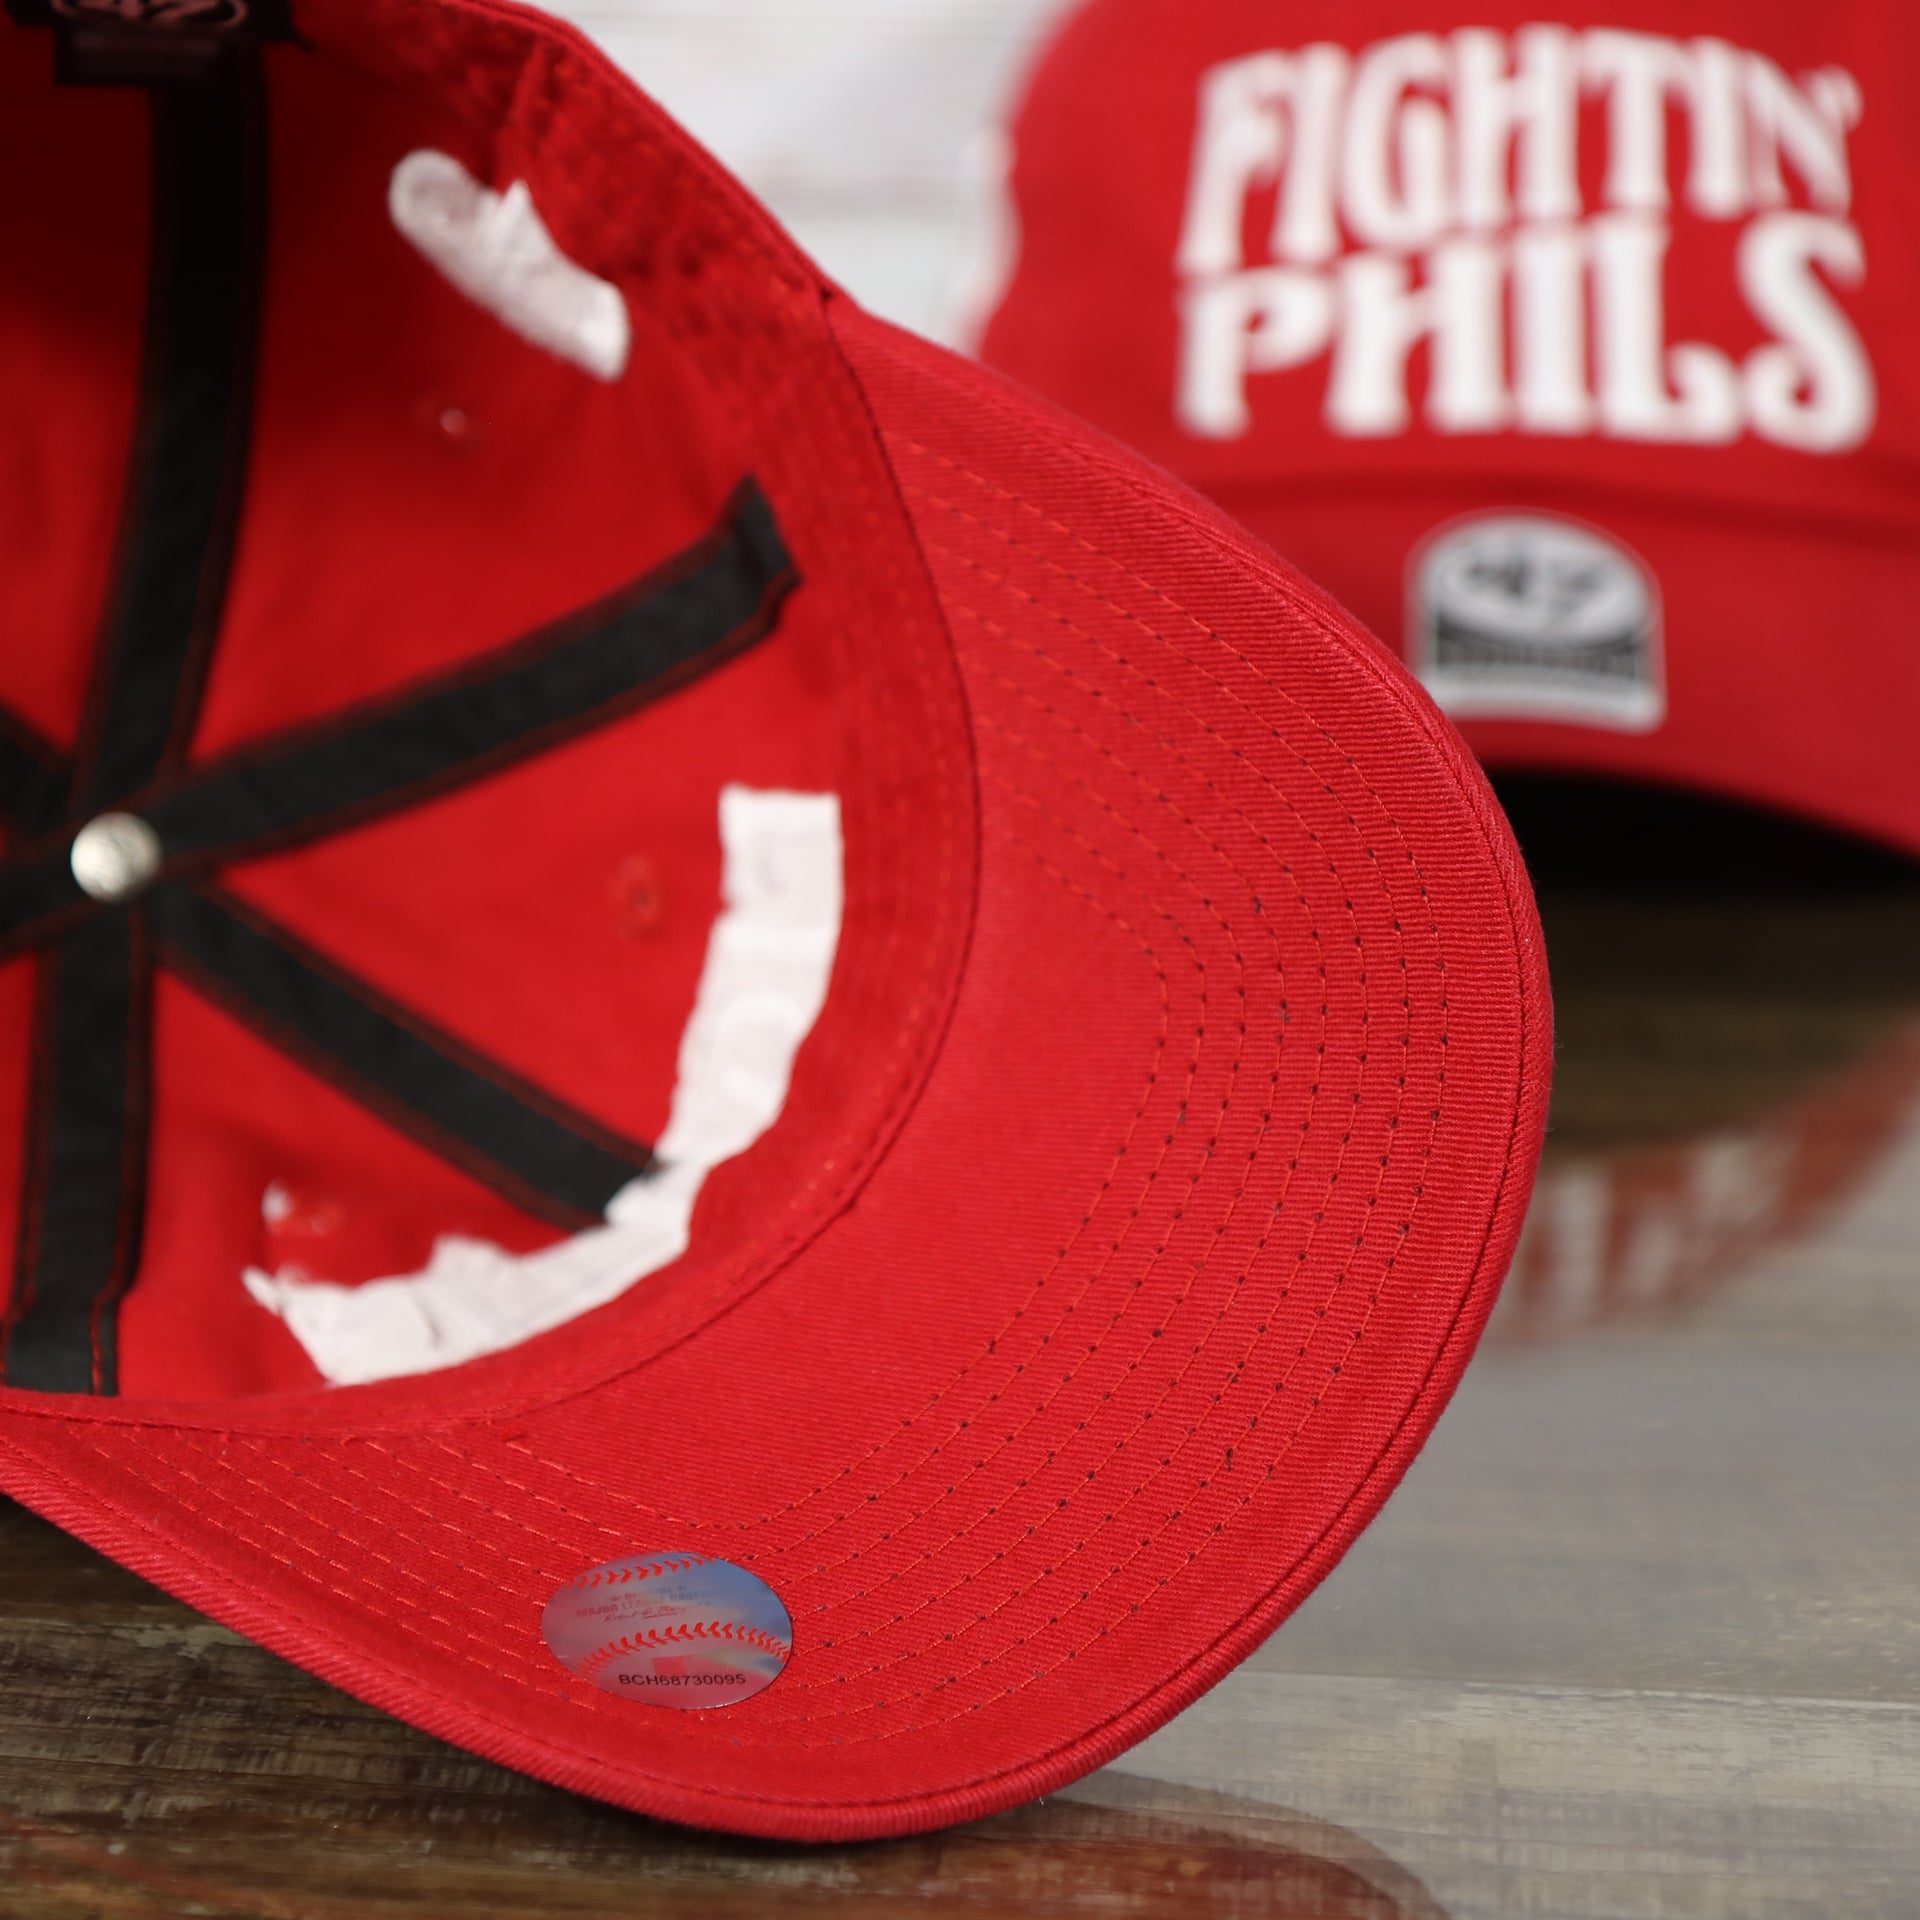 red under visor on the Philadelphia Phillies 2022 World Series Fightin' Phils Phillies Logo Side Patch Red Adjustable Dad Hat